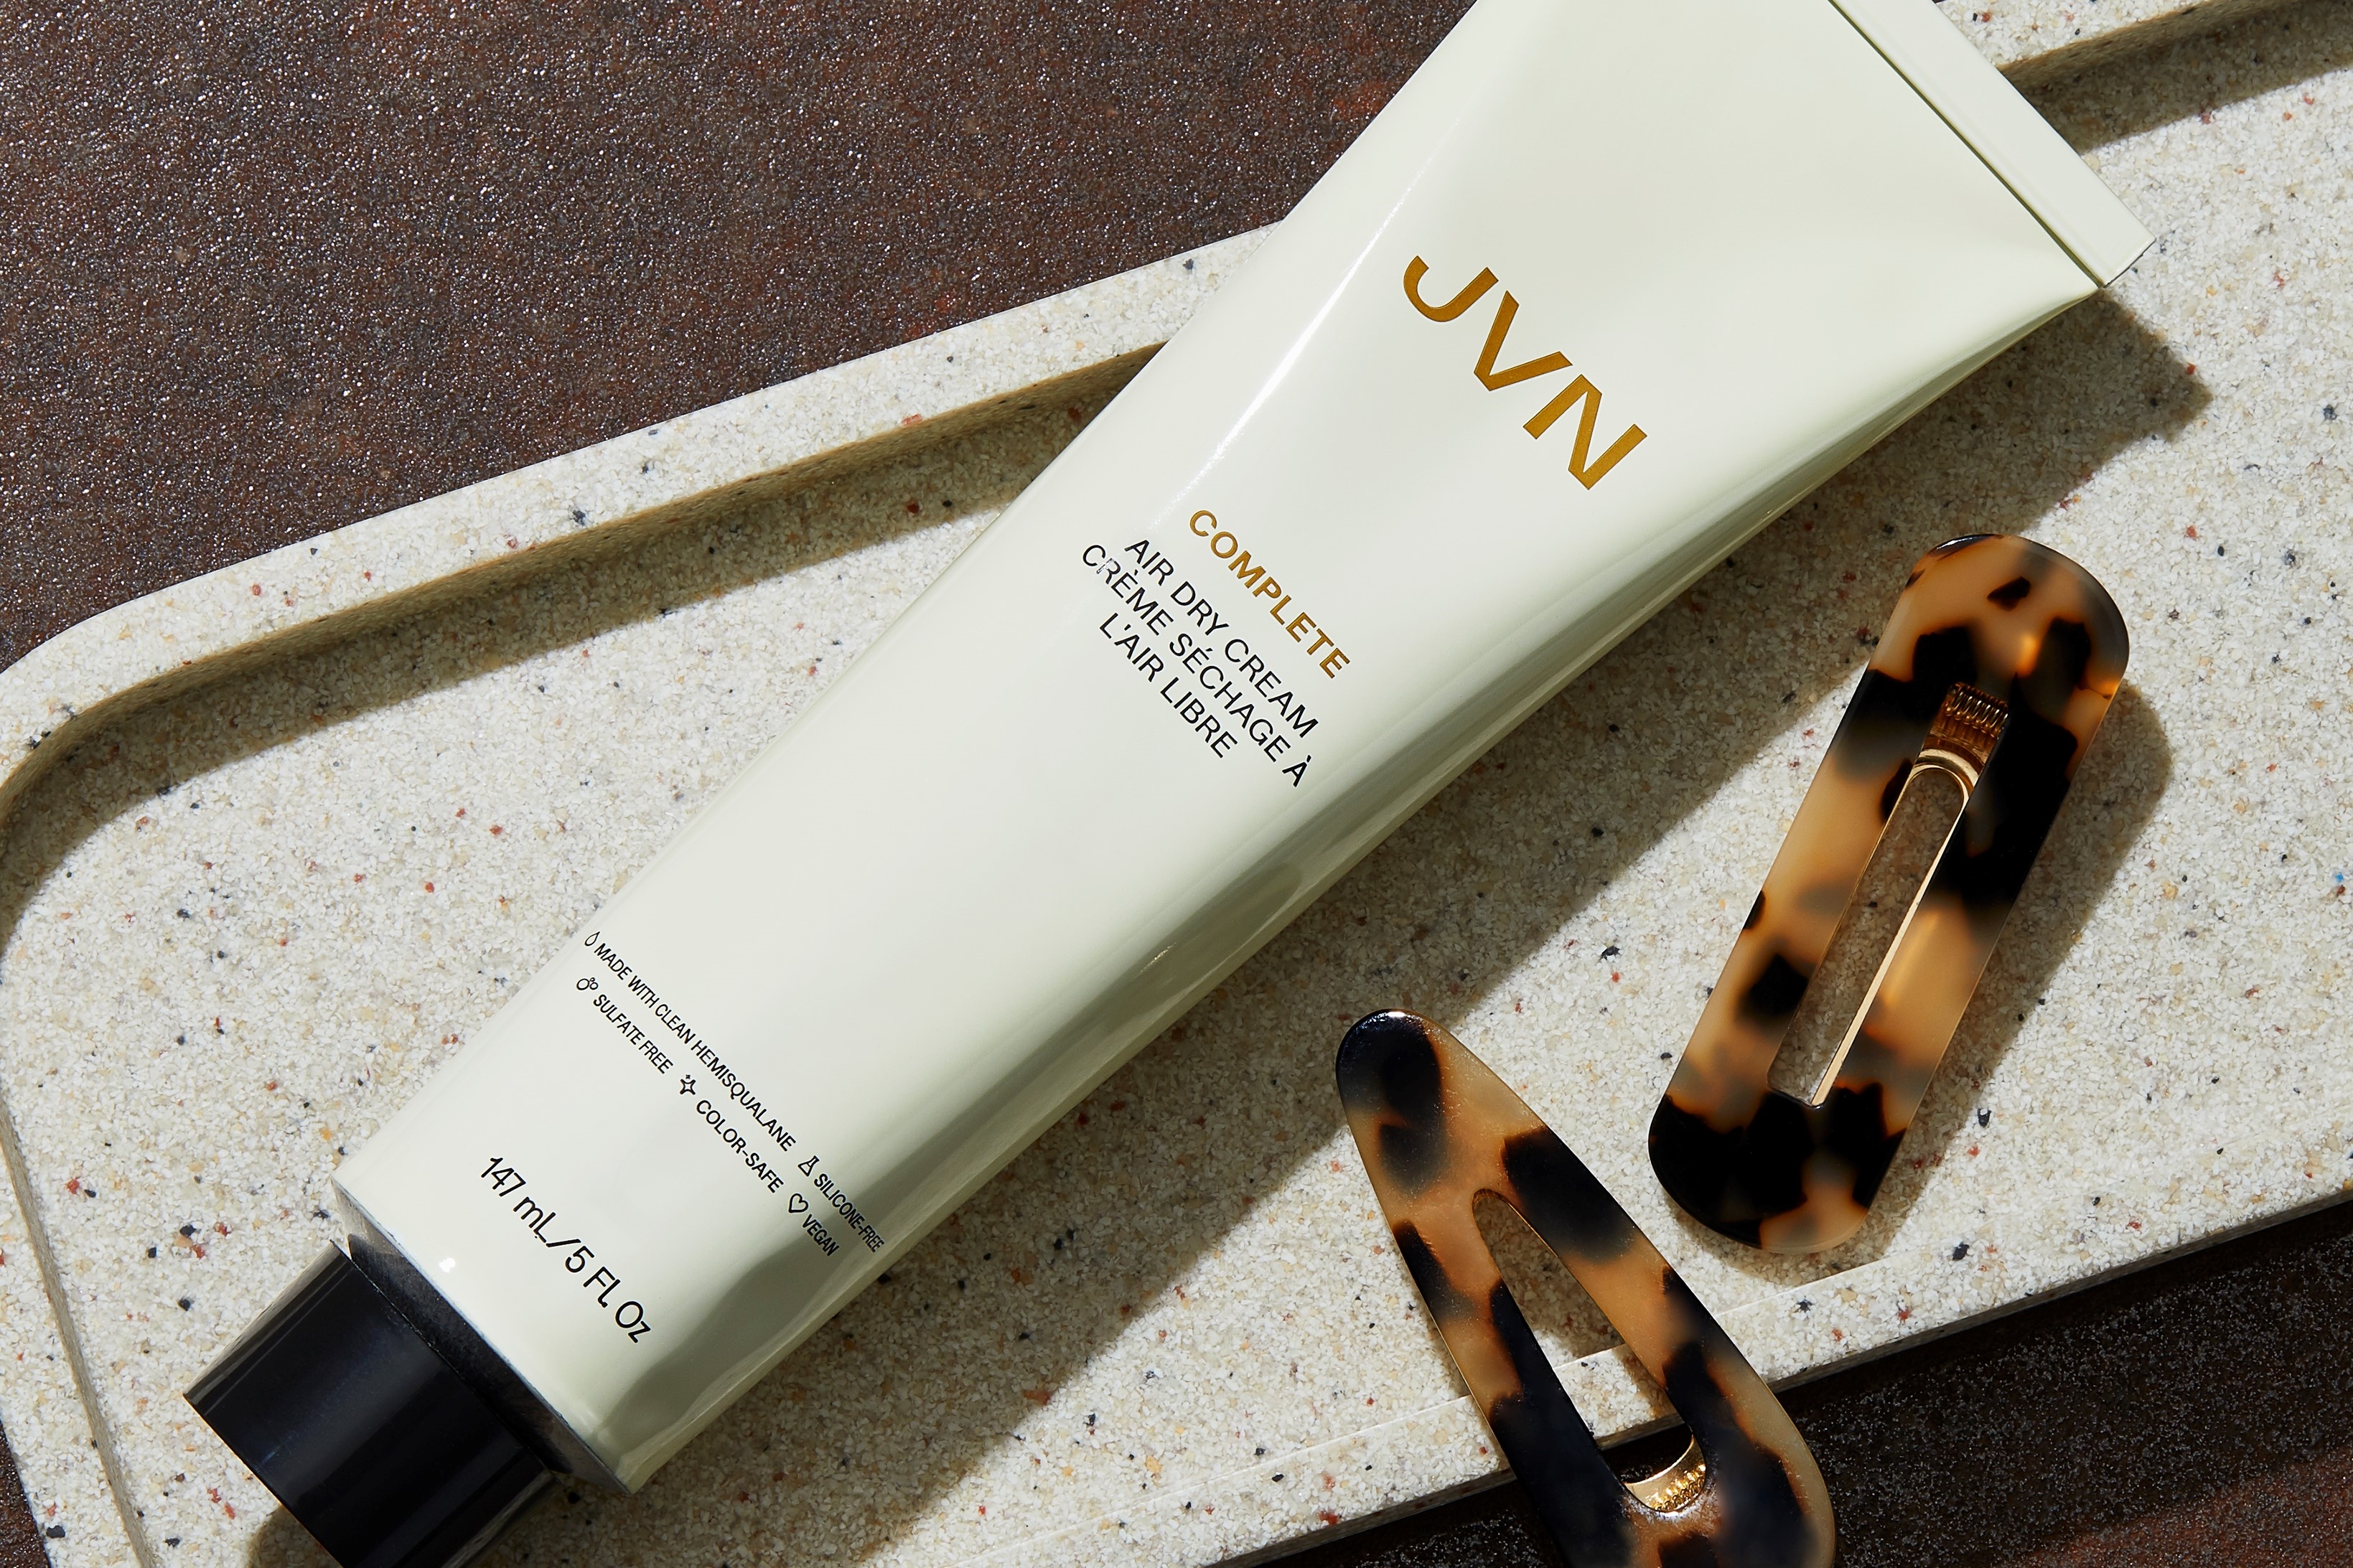 Why People Are Loving JVN Air Dry Cream Right Now